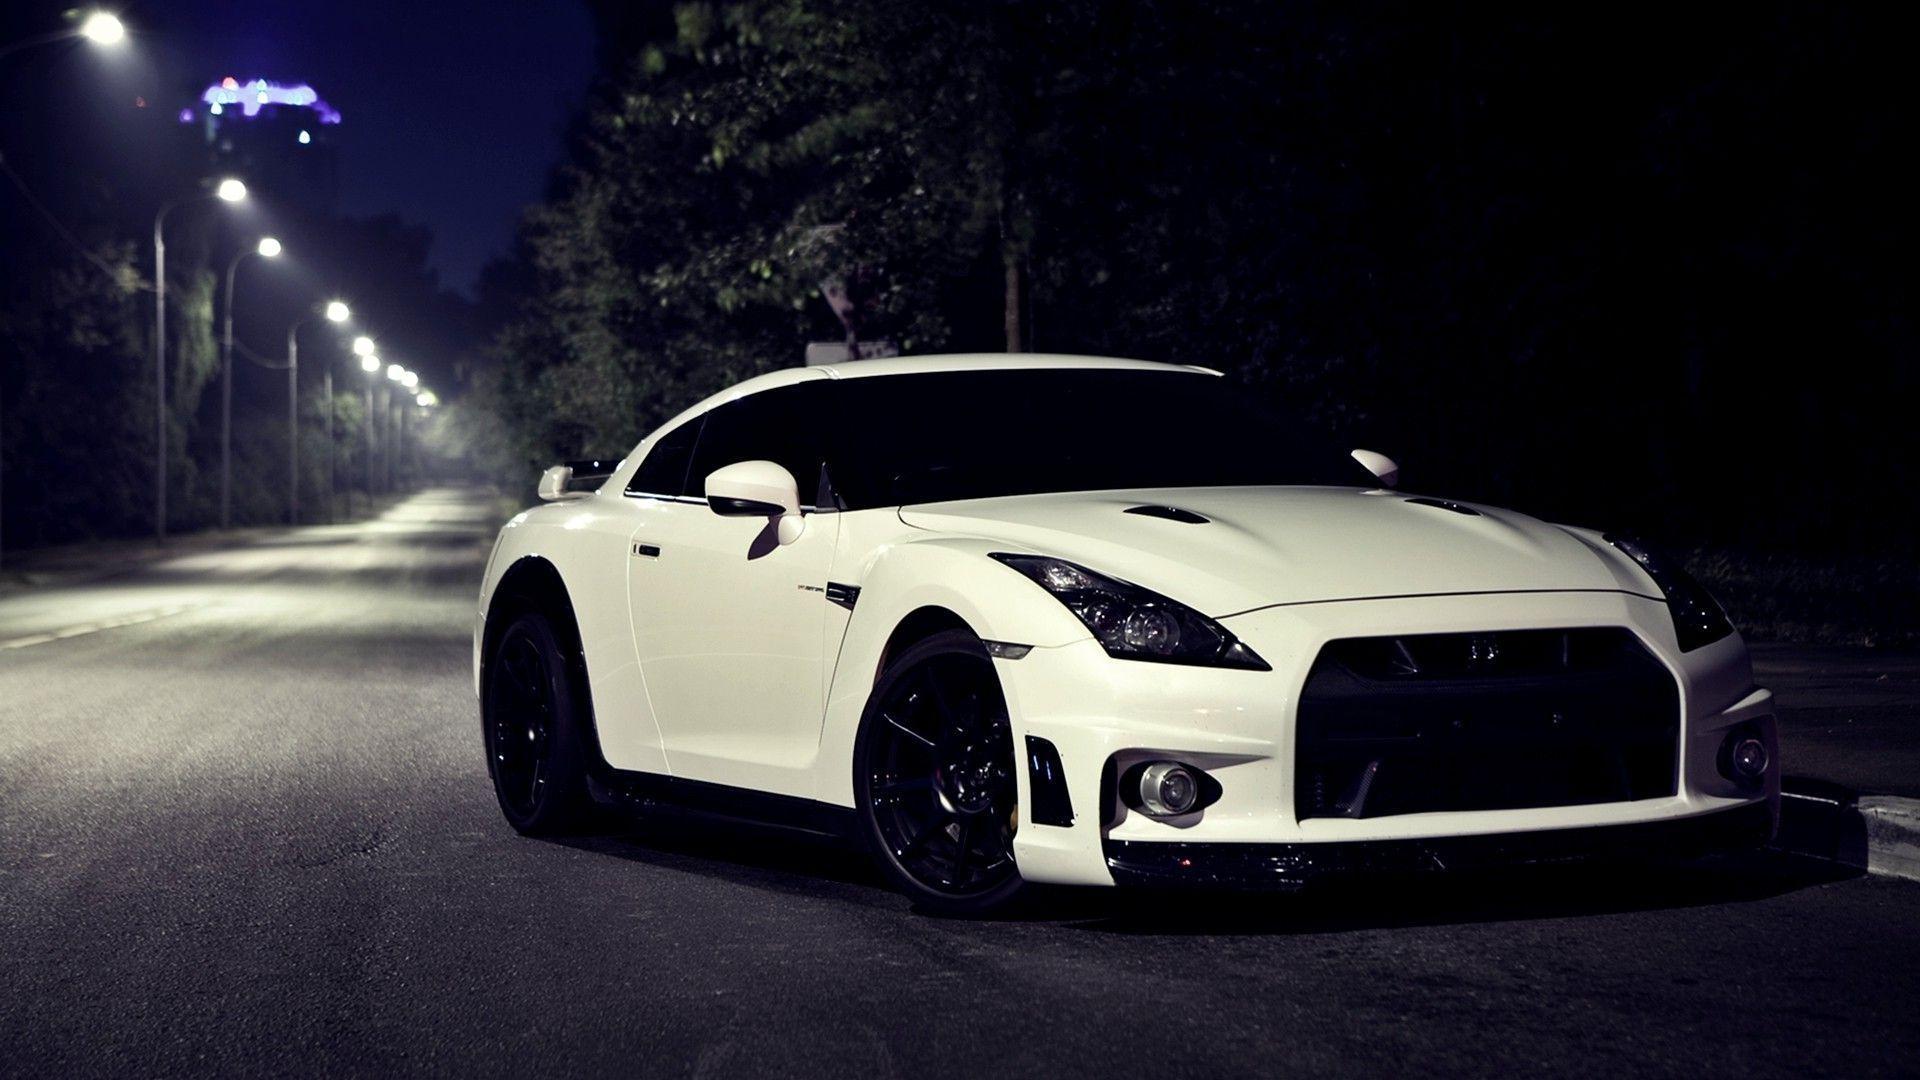 Awesome Nissan Gtr Wallpapers Hd